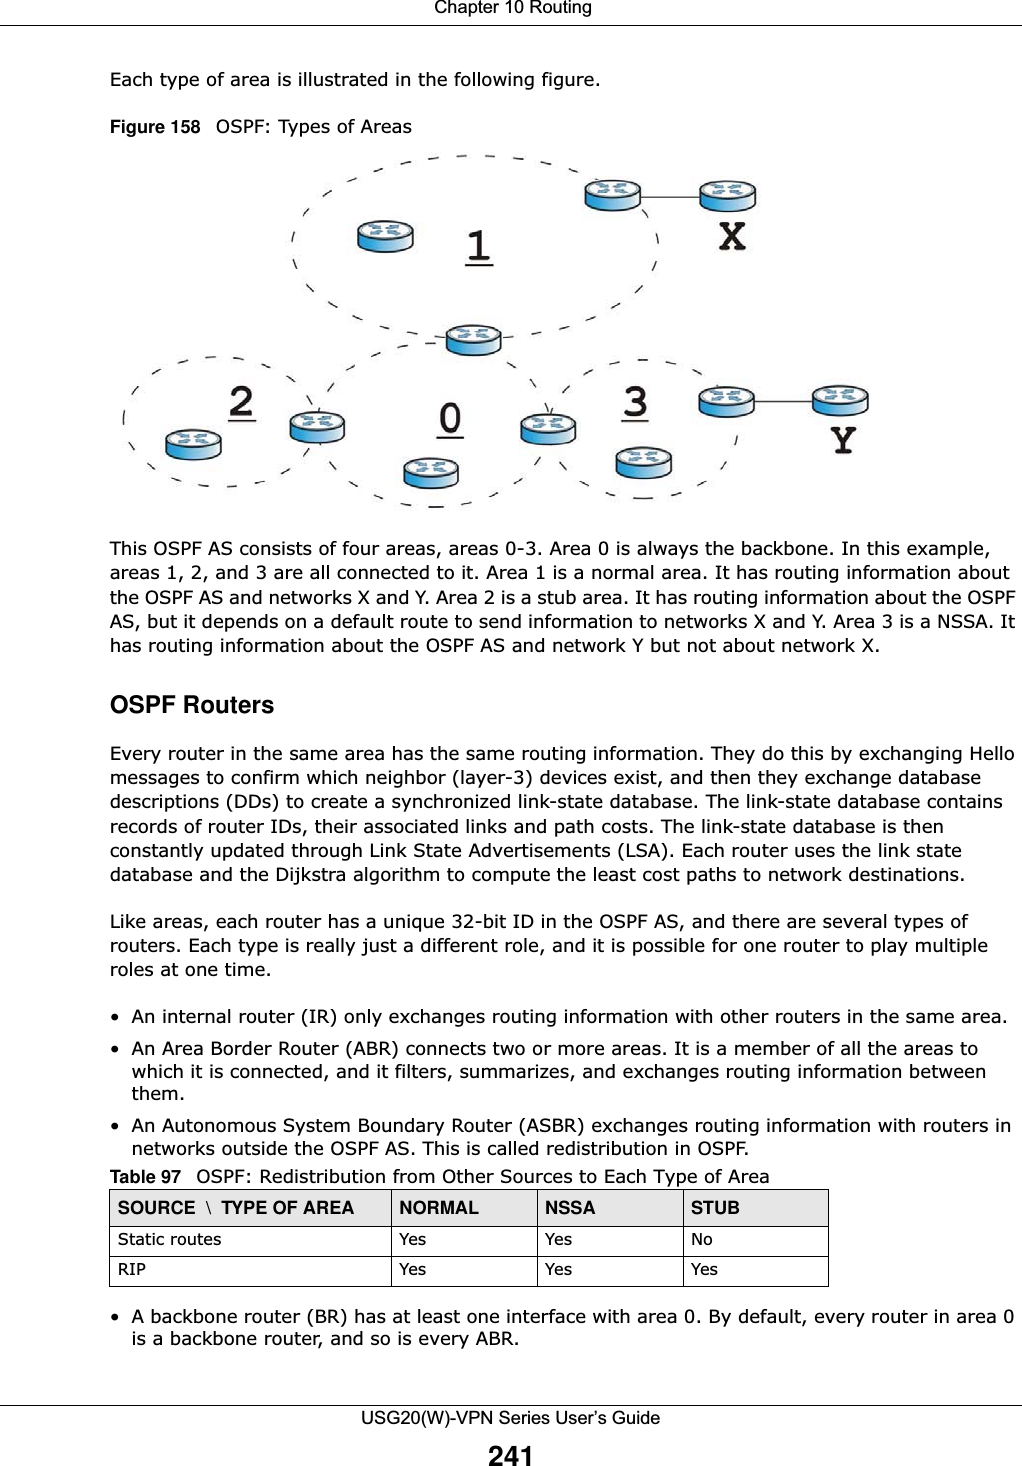  Chapter 10 RoutingUSG20(W)-VPN Series User’s Guide241Each type of area is illustrated in the following figure.Figure 158   OSPF: Types of AreasThis OSPF AS consists of four areas, areas 0-3. Area 0 is always the backbone. In this example, areas 1, 2, and 3 are all connected to it. Area 1 is a normal area. It has routing information about the OSPF AS and networks X and Y. Area 2 is a stub area. It has routing information about the OSPF AS, but it depends on a default route to send information to networks X and Y. Area 3 is a NSSA. It has routing information about the OSPF AS and network Y but not about network X.OSPF RoutersEvery router in the same area has the same routing information. They do this by exchanging Hello messages to confirm which neighbor (layer-3) devices exist, and then they exchange database descriptions (DDs) to create a synchronized link-state database. The link-state database contains records of router IDs, their associated links and path costs. The link-state database is then constantly updated through Link State Advertisements (LSA). Each router uses the link state database and the Dijkstra algorithm to compute the least cost paths to network destinations.Like areas, each router has a unique 32-bit ID in the OSPF AS, and there are several types of routers. Each type is really just a different role, and it is possible for one router to play multiple roles at one time.• An internal router (IR) only exchanges routing information with other routers in the same area.• An Area Border Router (ABR) connects two or more areas. It is a member of all the areas to which it is connected, and it filters, summarizes, and exchanges routing information between them.• An Autonomous System Boundary Router (ASBR) exchanges routing information with routers in networks outside the OSPF AS. This is called redistribution in OSPF.• A backbone router (BR) has at least one interface with area 0. By default, every router in area 0 is a backbone router, and so is every ABR.Table 97   OSPF: Redistribution from Other Sources to Each Type of AreaSOURCE  \  TYPE OF AREA NORMAL NSSA STUBStatic routes Yes Yes NoRIP Yes Yes Yes